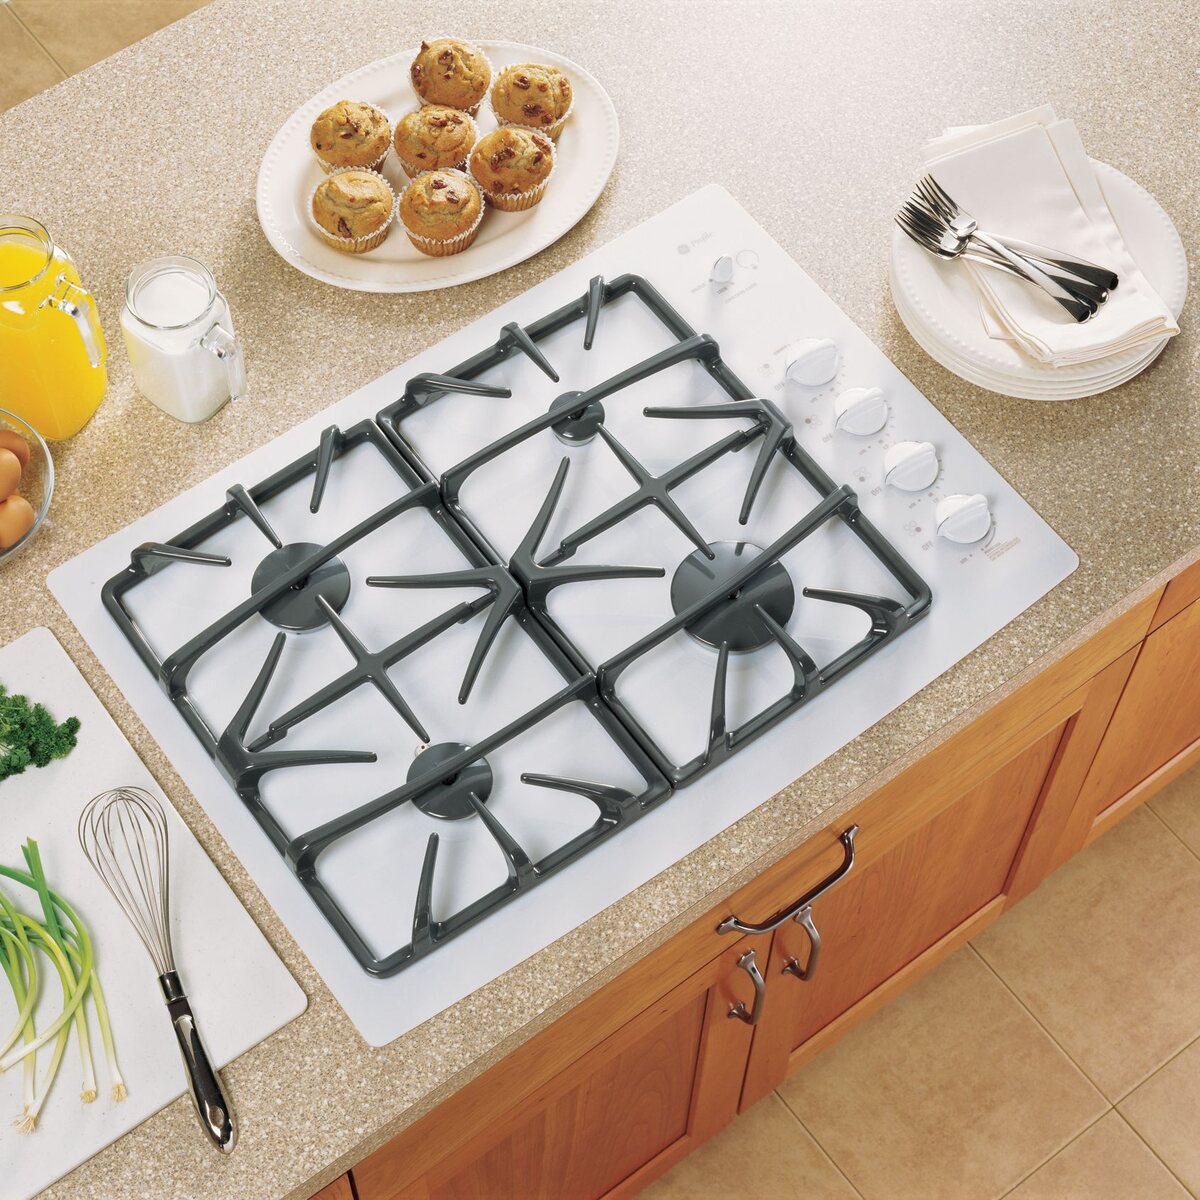 15 Unbelievable Gas Cooktop For 2023